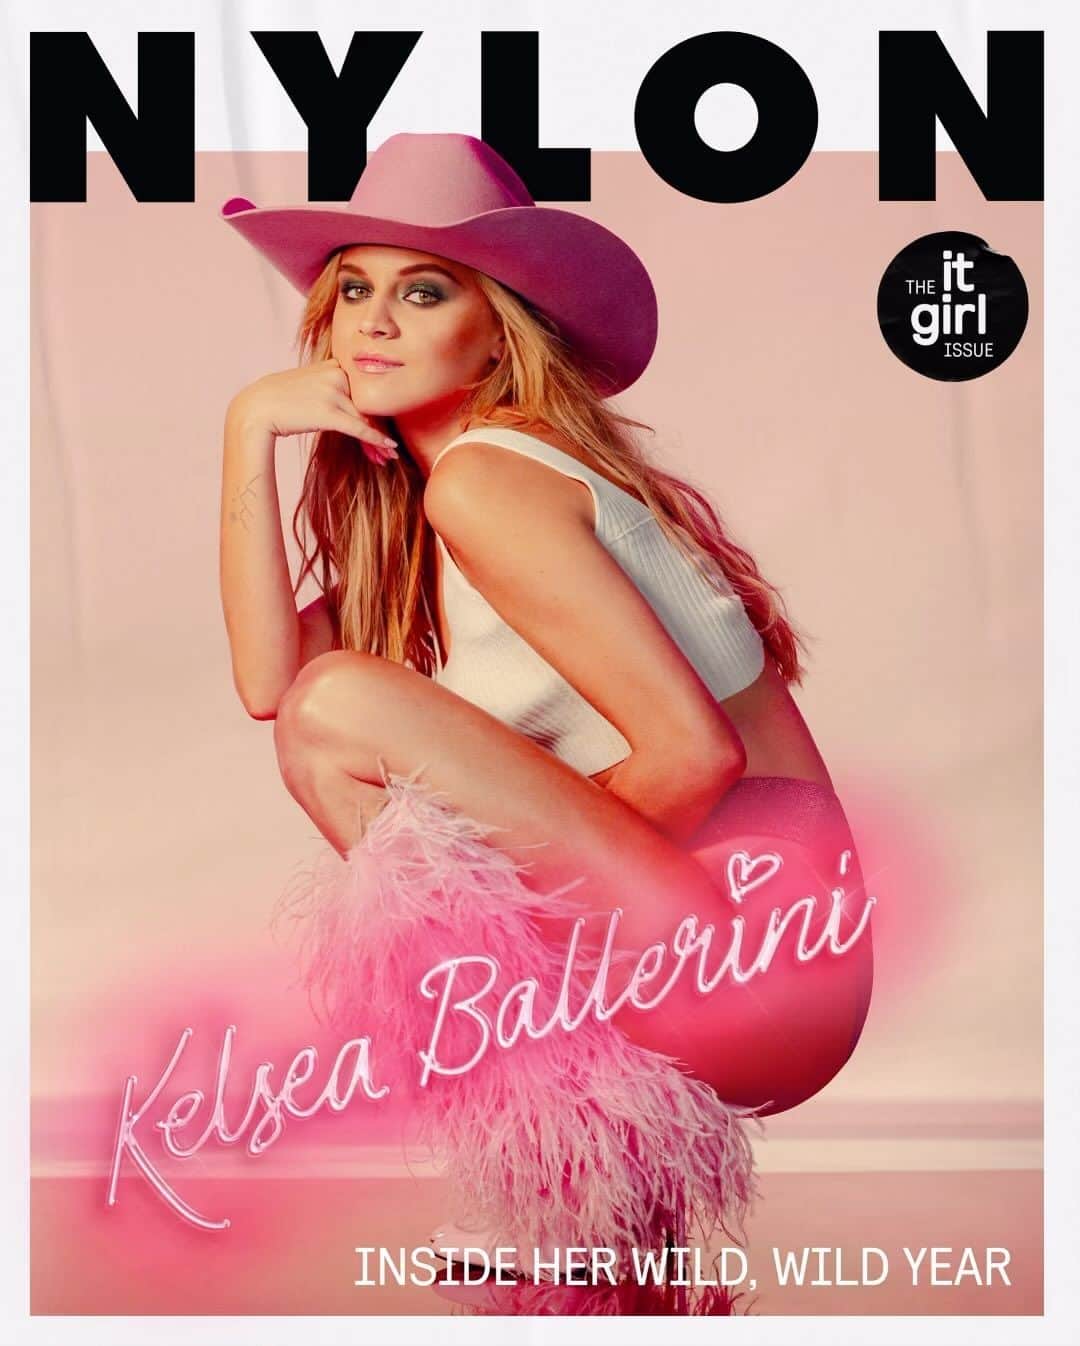 Nylon Magazineのインスタグラム：「Introducing NYLON’s 2023 It Girl cover star, @KelseaBallerini. After channeling a public divorce into the best music of her career, the singer is saying goodbye to her 20s and hello to new love. “I literally feel like there was not one more drop of my 20s I could have wrung out,” the country star says. “I’m ready to be a grown-up now, that’s so hot to me.” At the link in bio, Ballerini sits down with @mccarthylauren to talk embracing what’s next.  Photographer: @ryanpfluger Stylist: @tiffanyreid Set Designer: @not.thestate Grooming/Hair: @davidvoncannon Makeup: @kdeenihan Manicure: @akinailsnyc Talent Bookings: @specialprojectsmedia Photo Director: @heartattackack Editor in Chief: @mccarthylauren SVP Fashion: @tiffanyreid SVP Creative: @karen.hibbert」